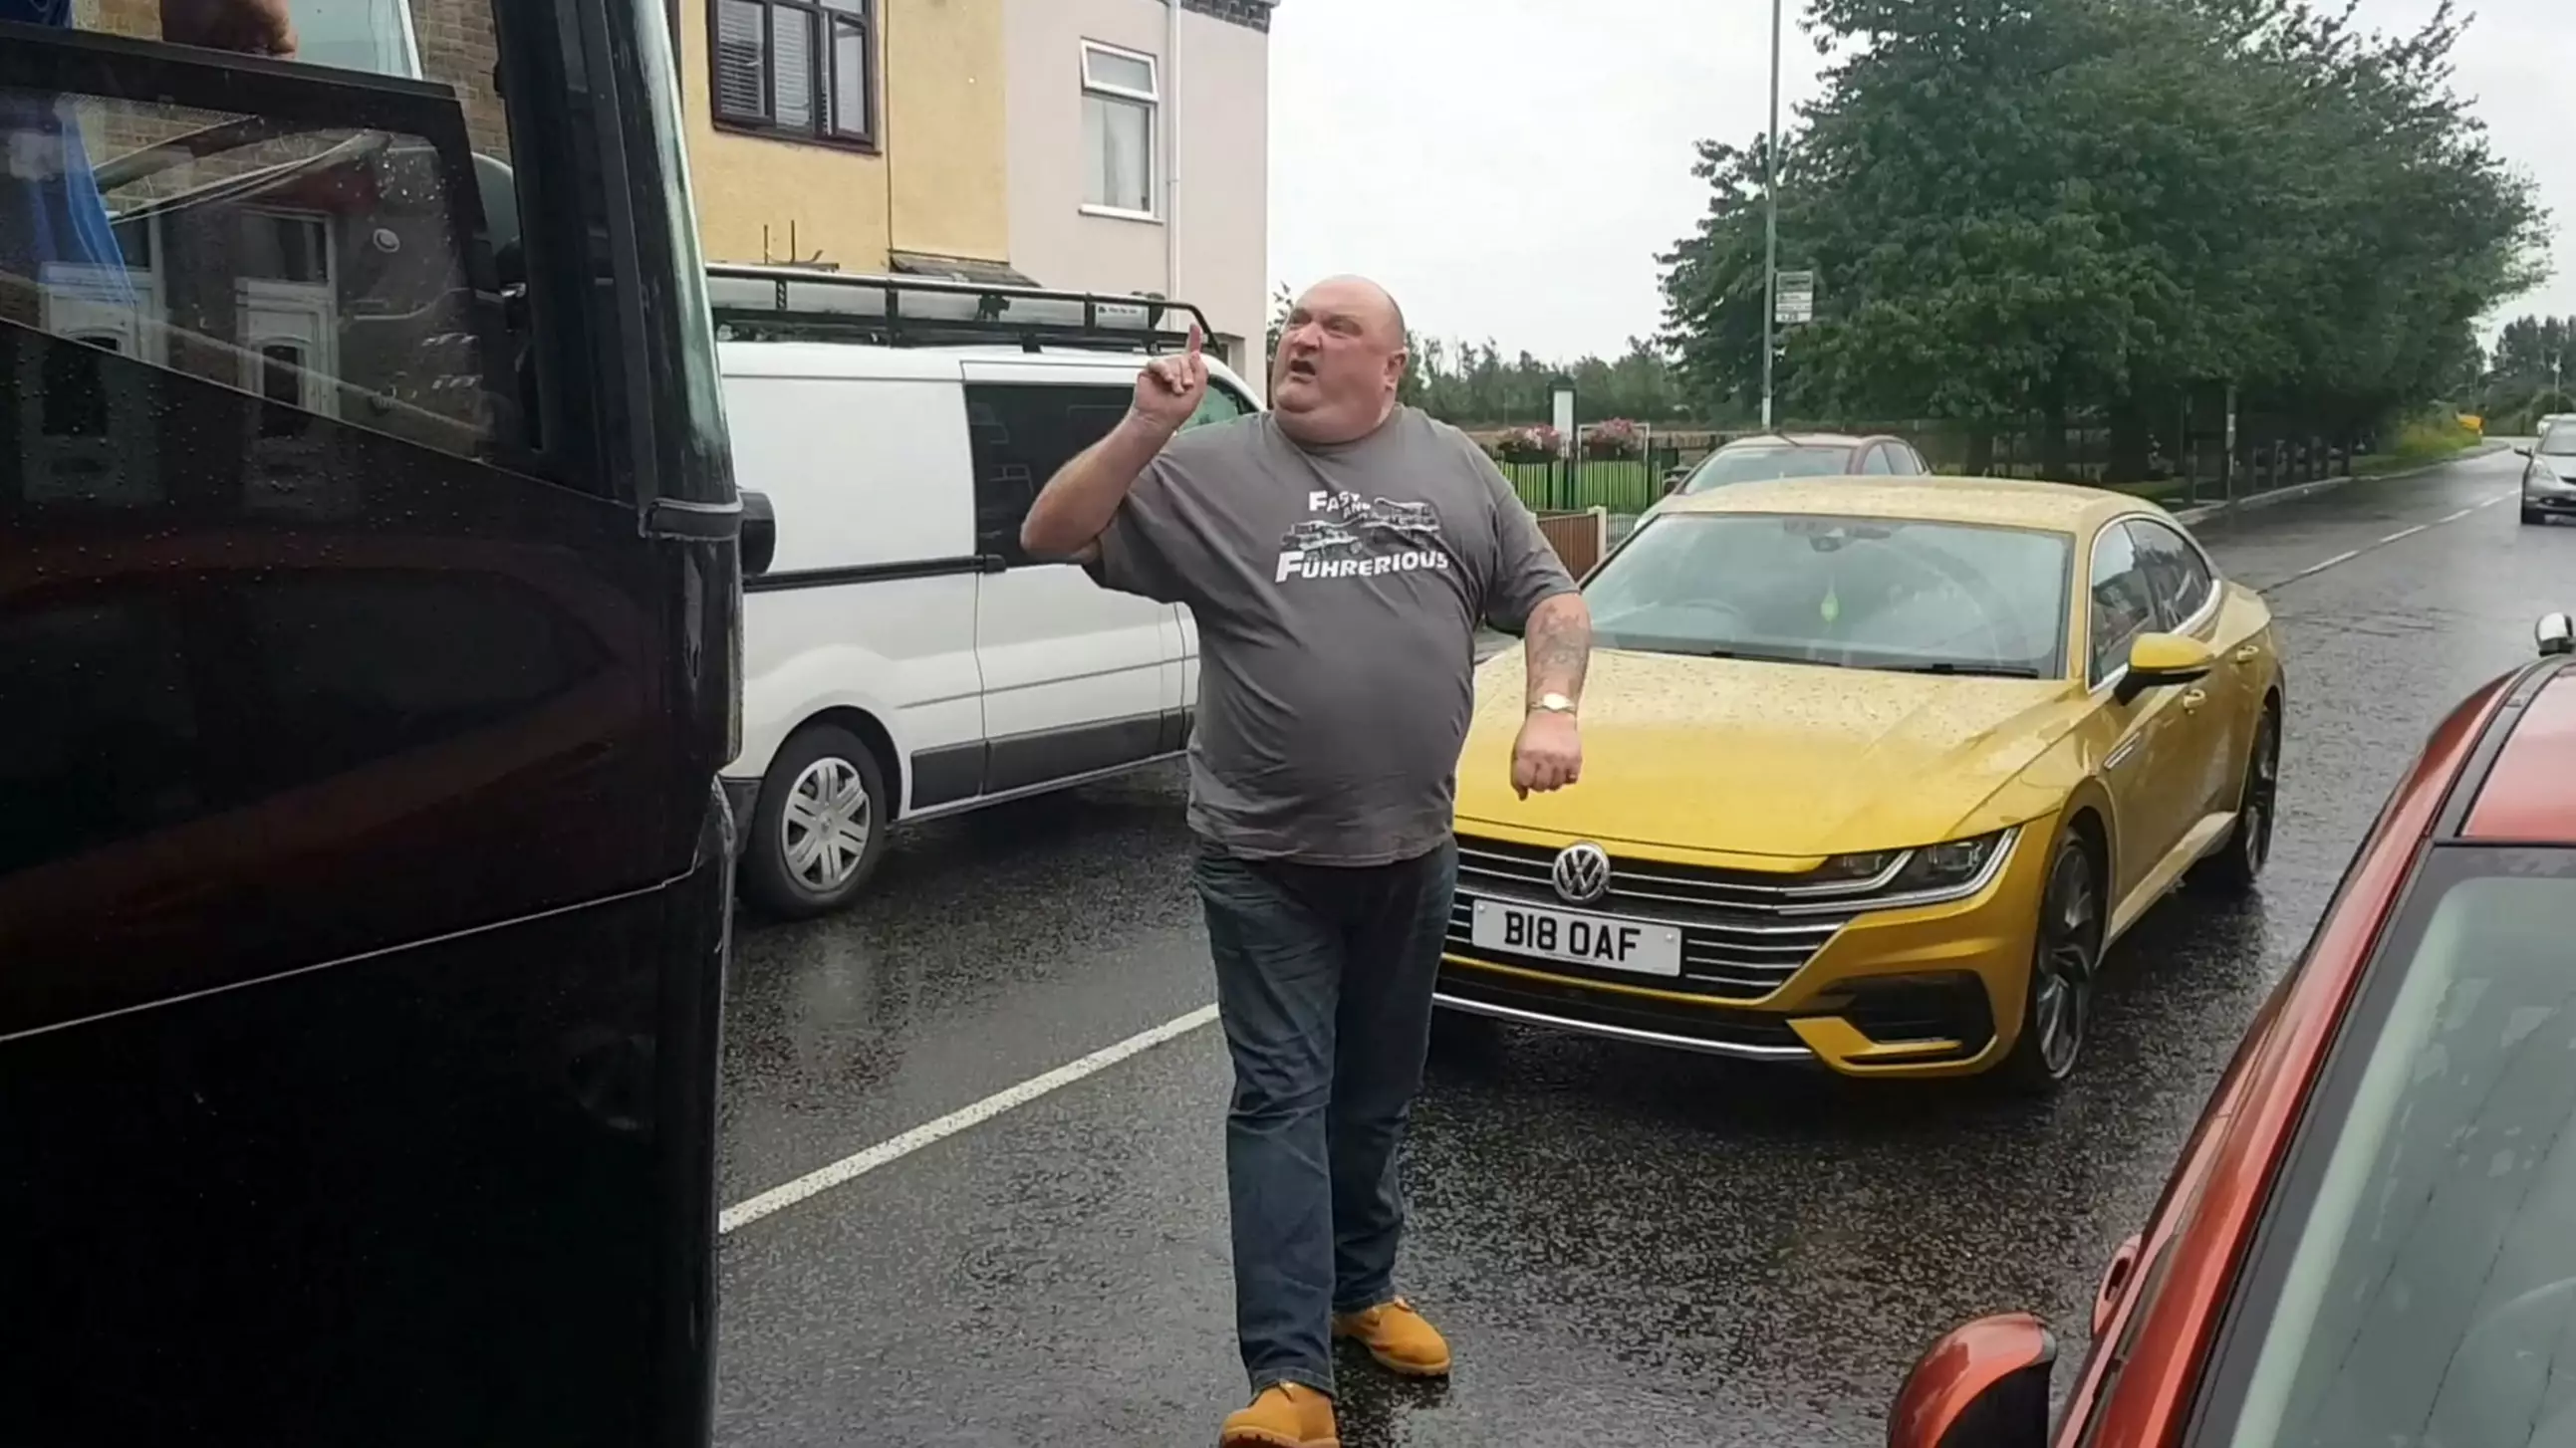 Angry Driver Branded 'Big Oaf' After Fiery Confrontation With Coach Driver